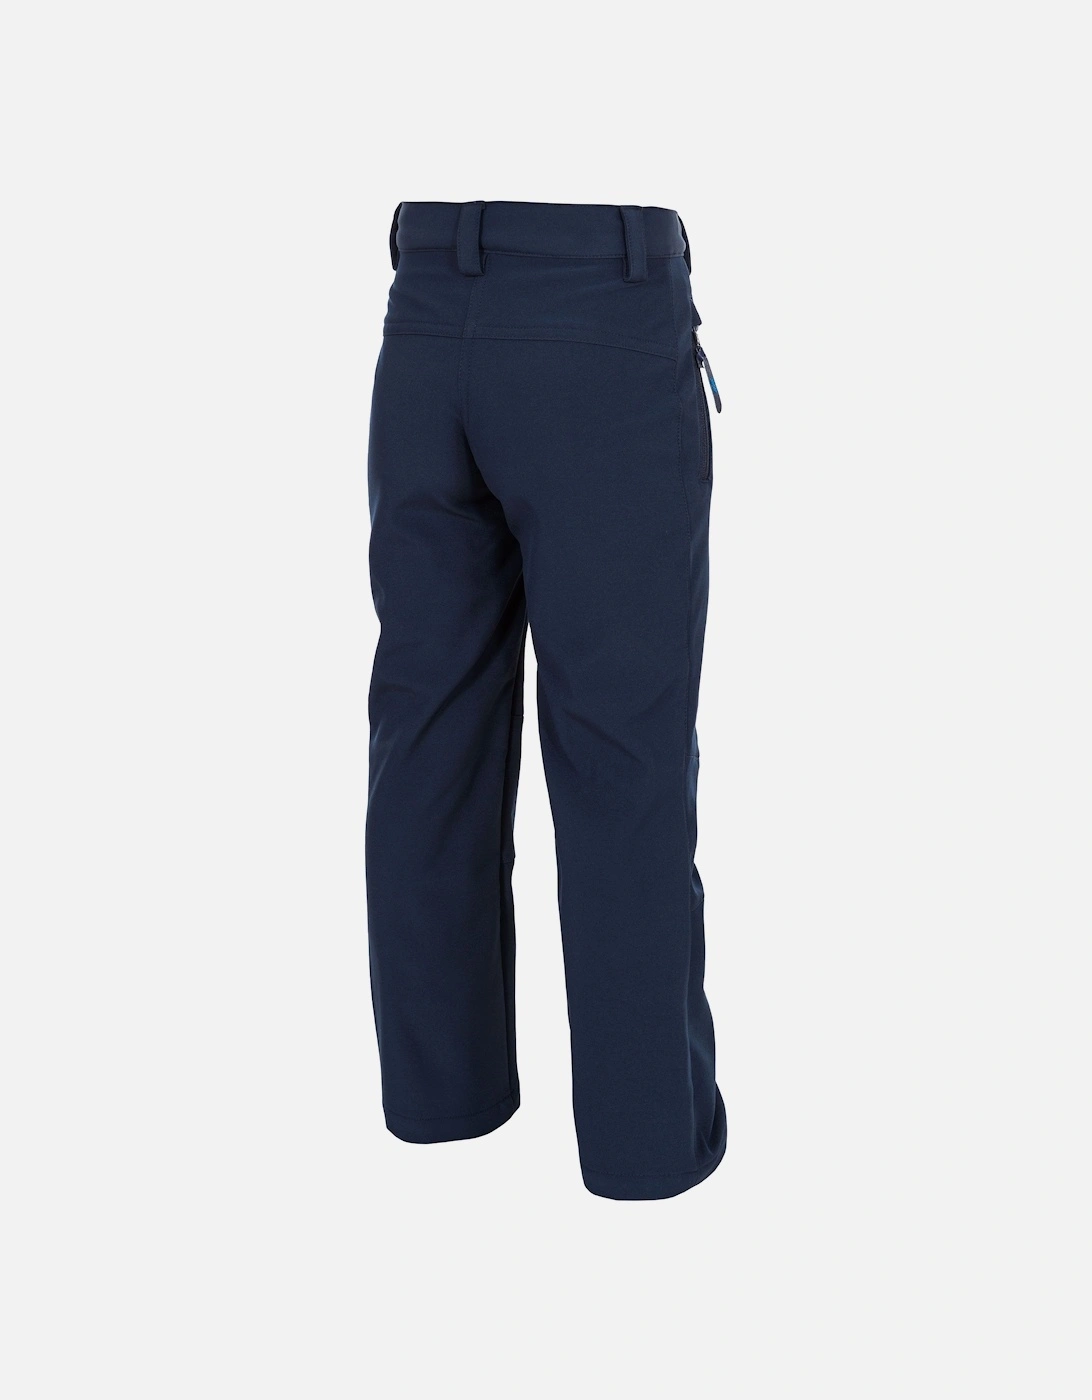 Childrens/Kids Galloway Softshell Trousers